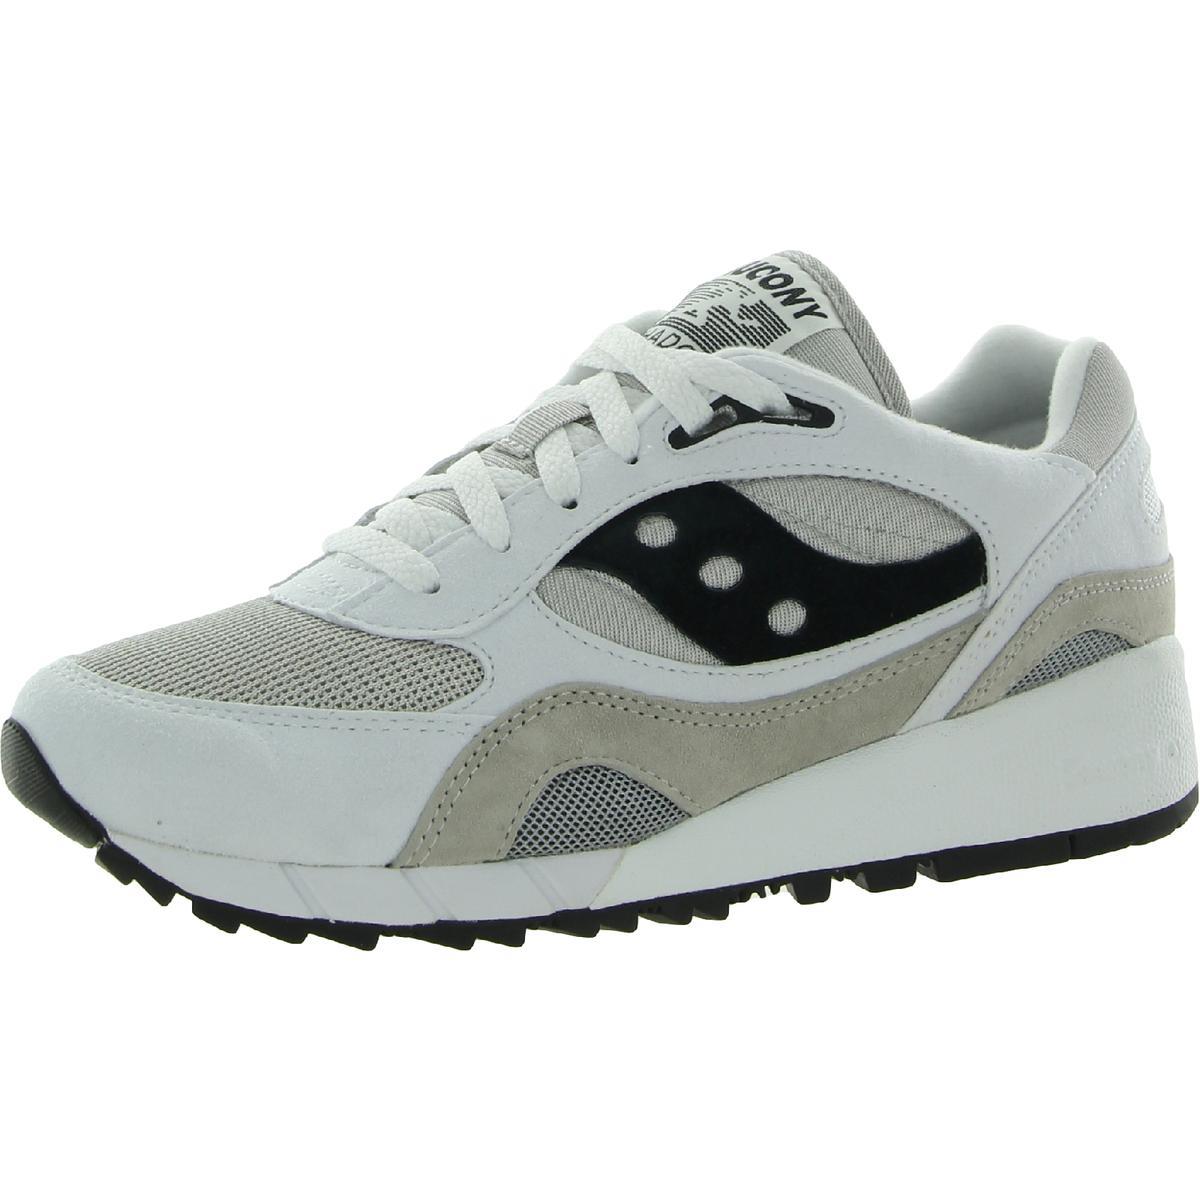 Saucony Men`s Shadow 6000 Leather Retro Inspired Athletic Fashion Sneaker Wht/Grey/Blk